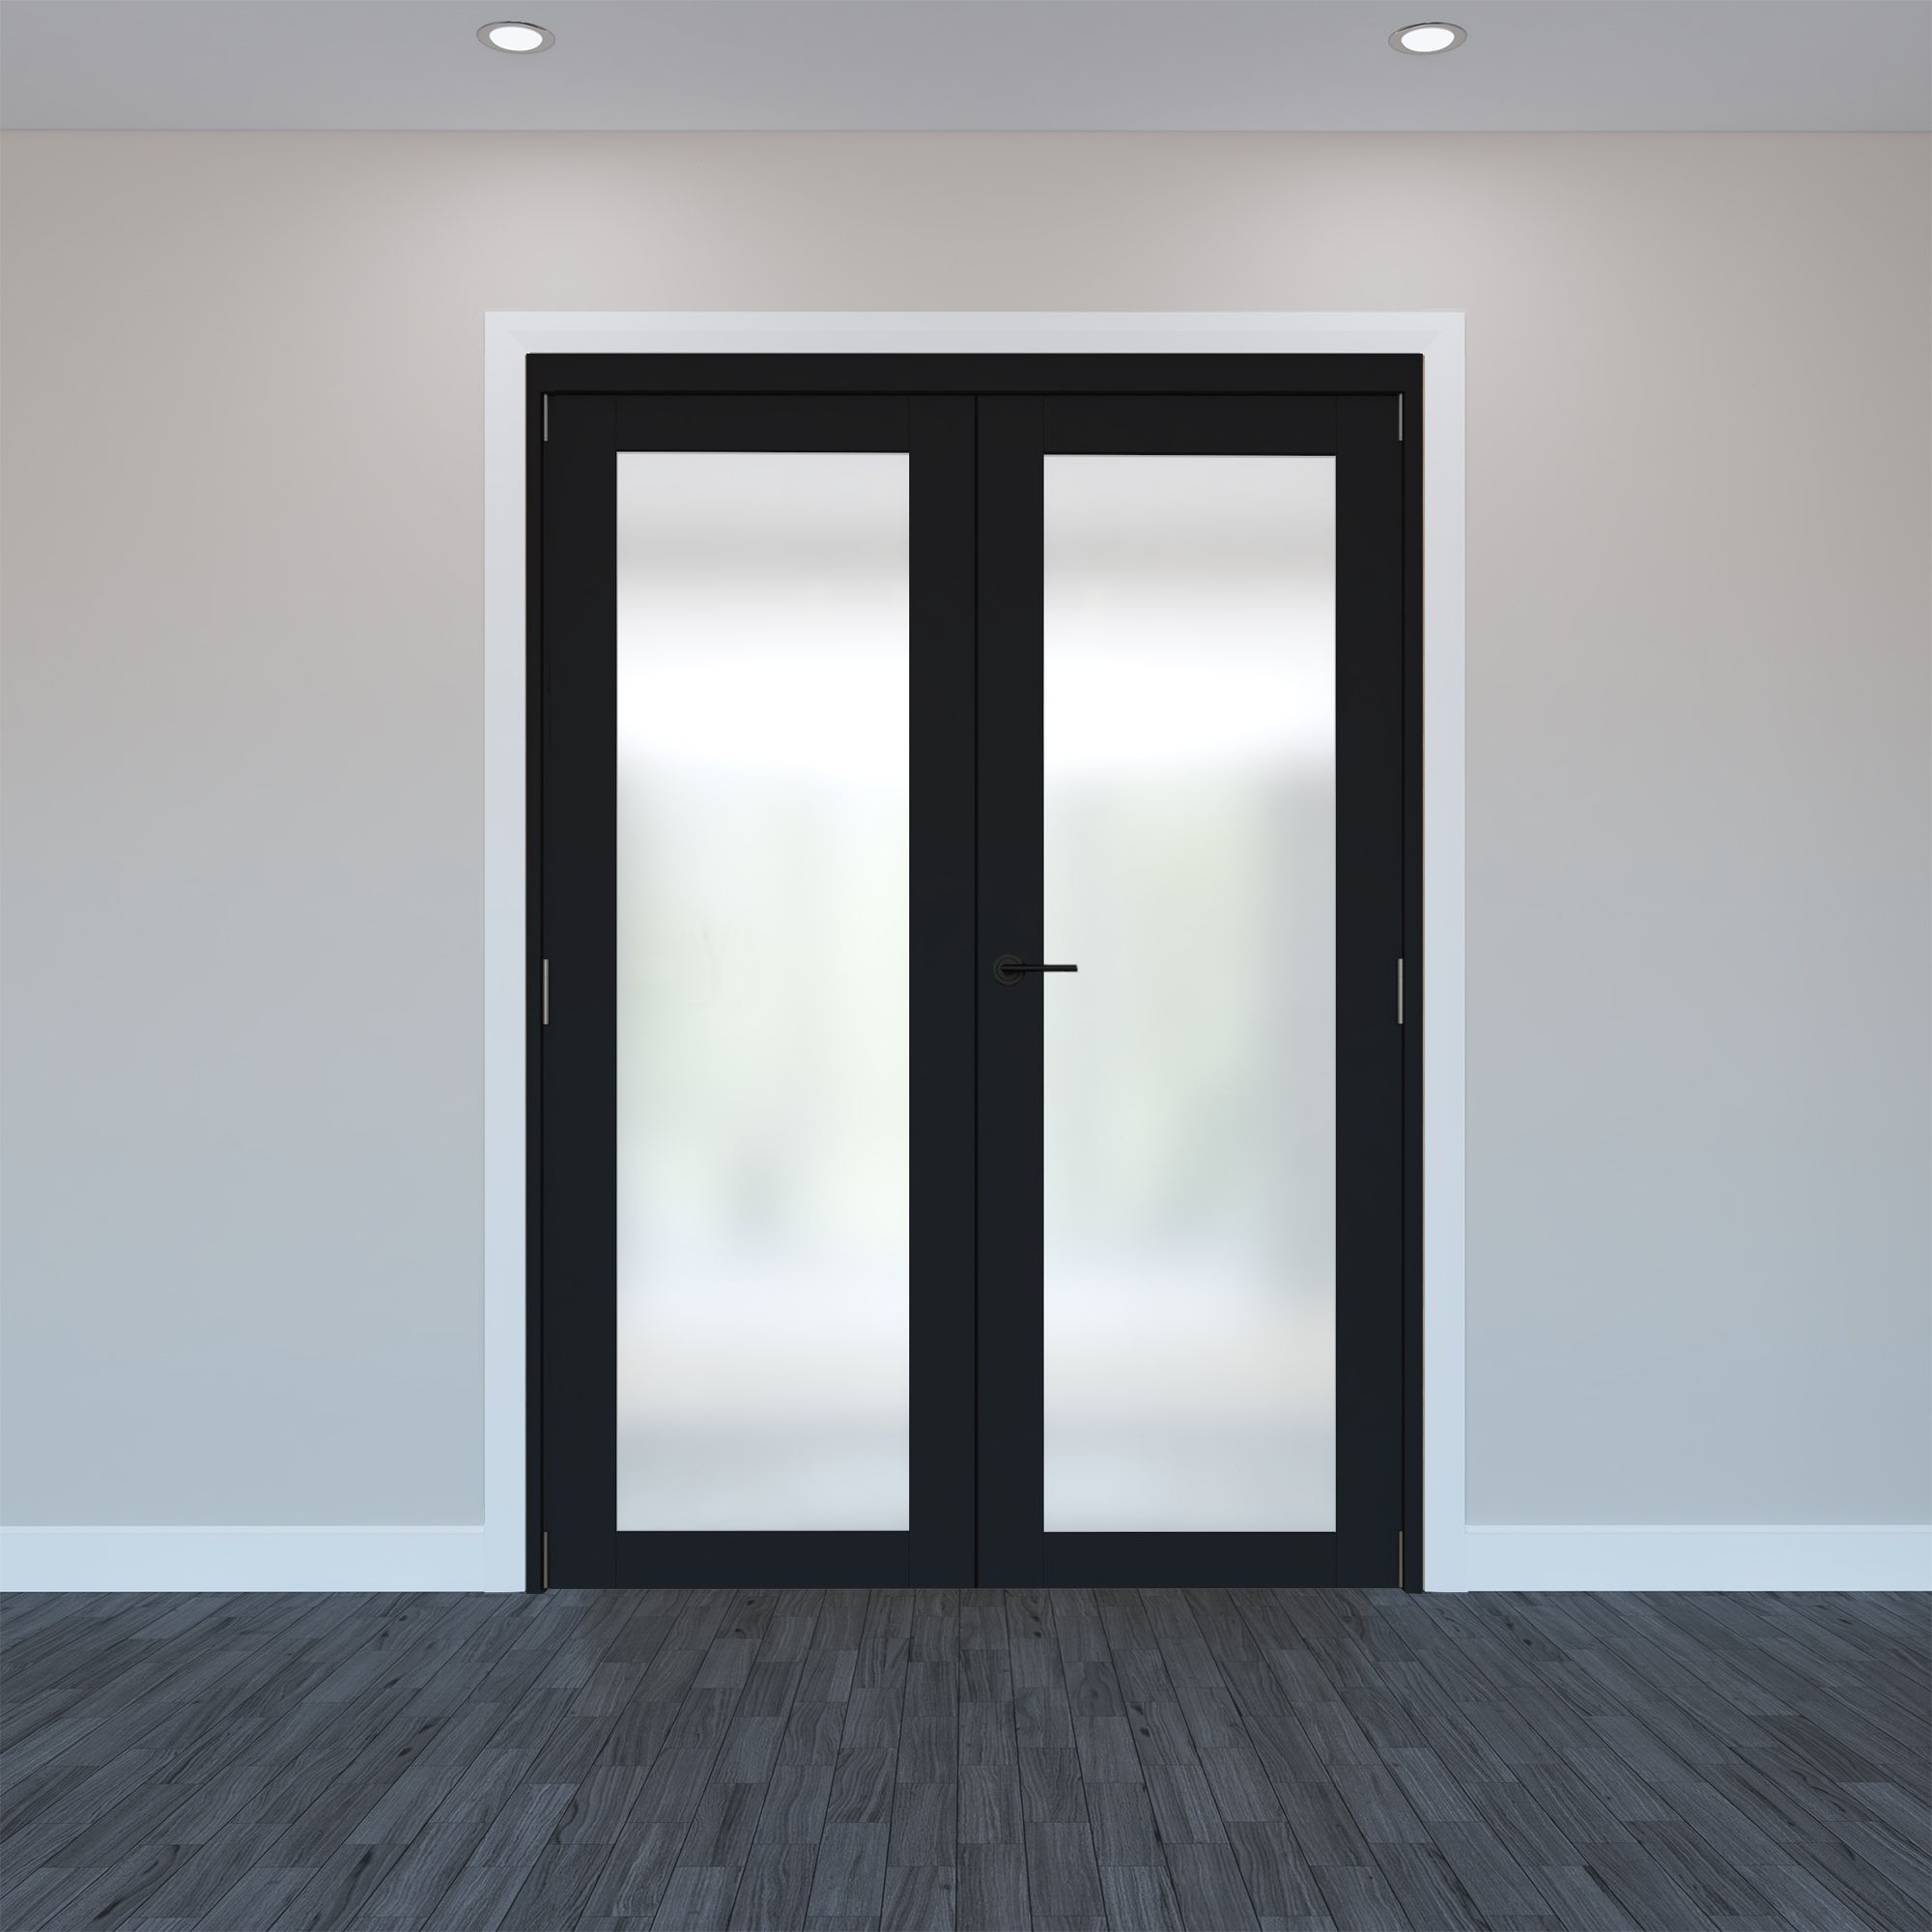 1 panel 1 Lite Frosted Fully glazed Timber Black Internal French door set 2017mm x 133mm x 1597mm - Fully Finished